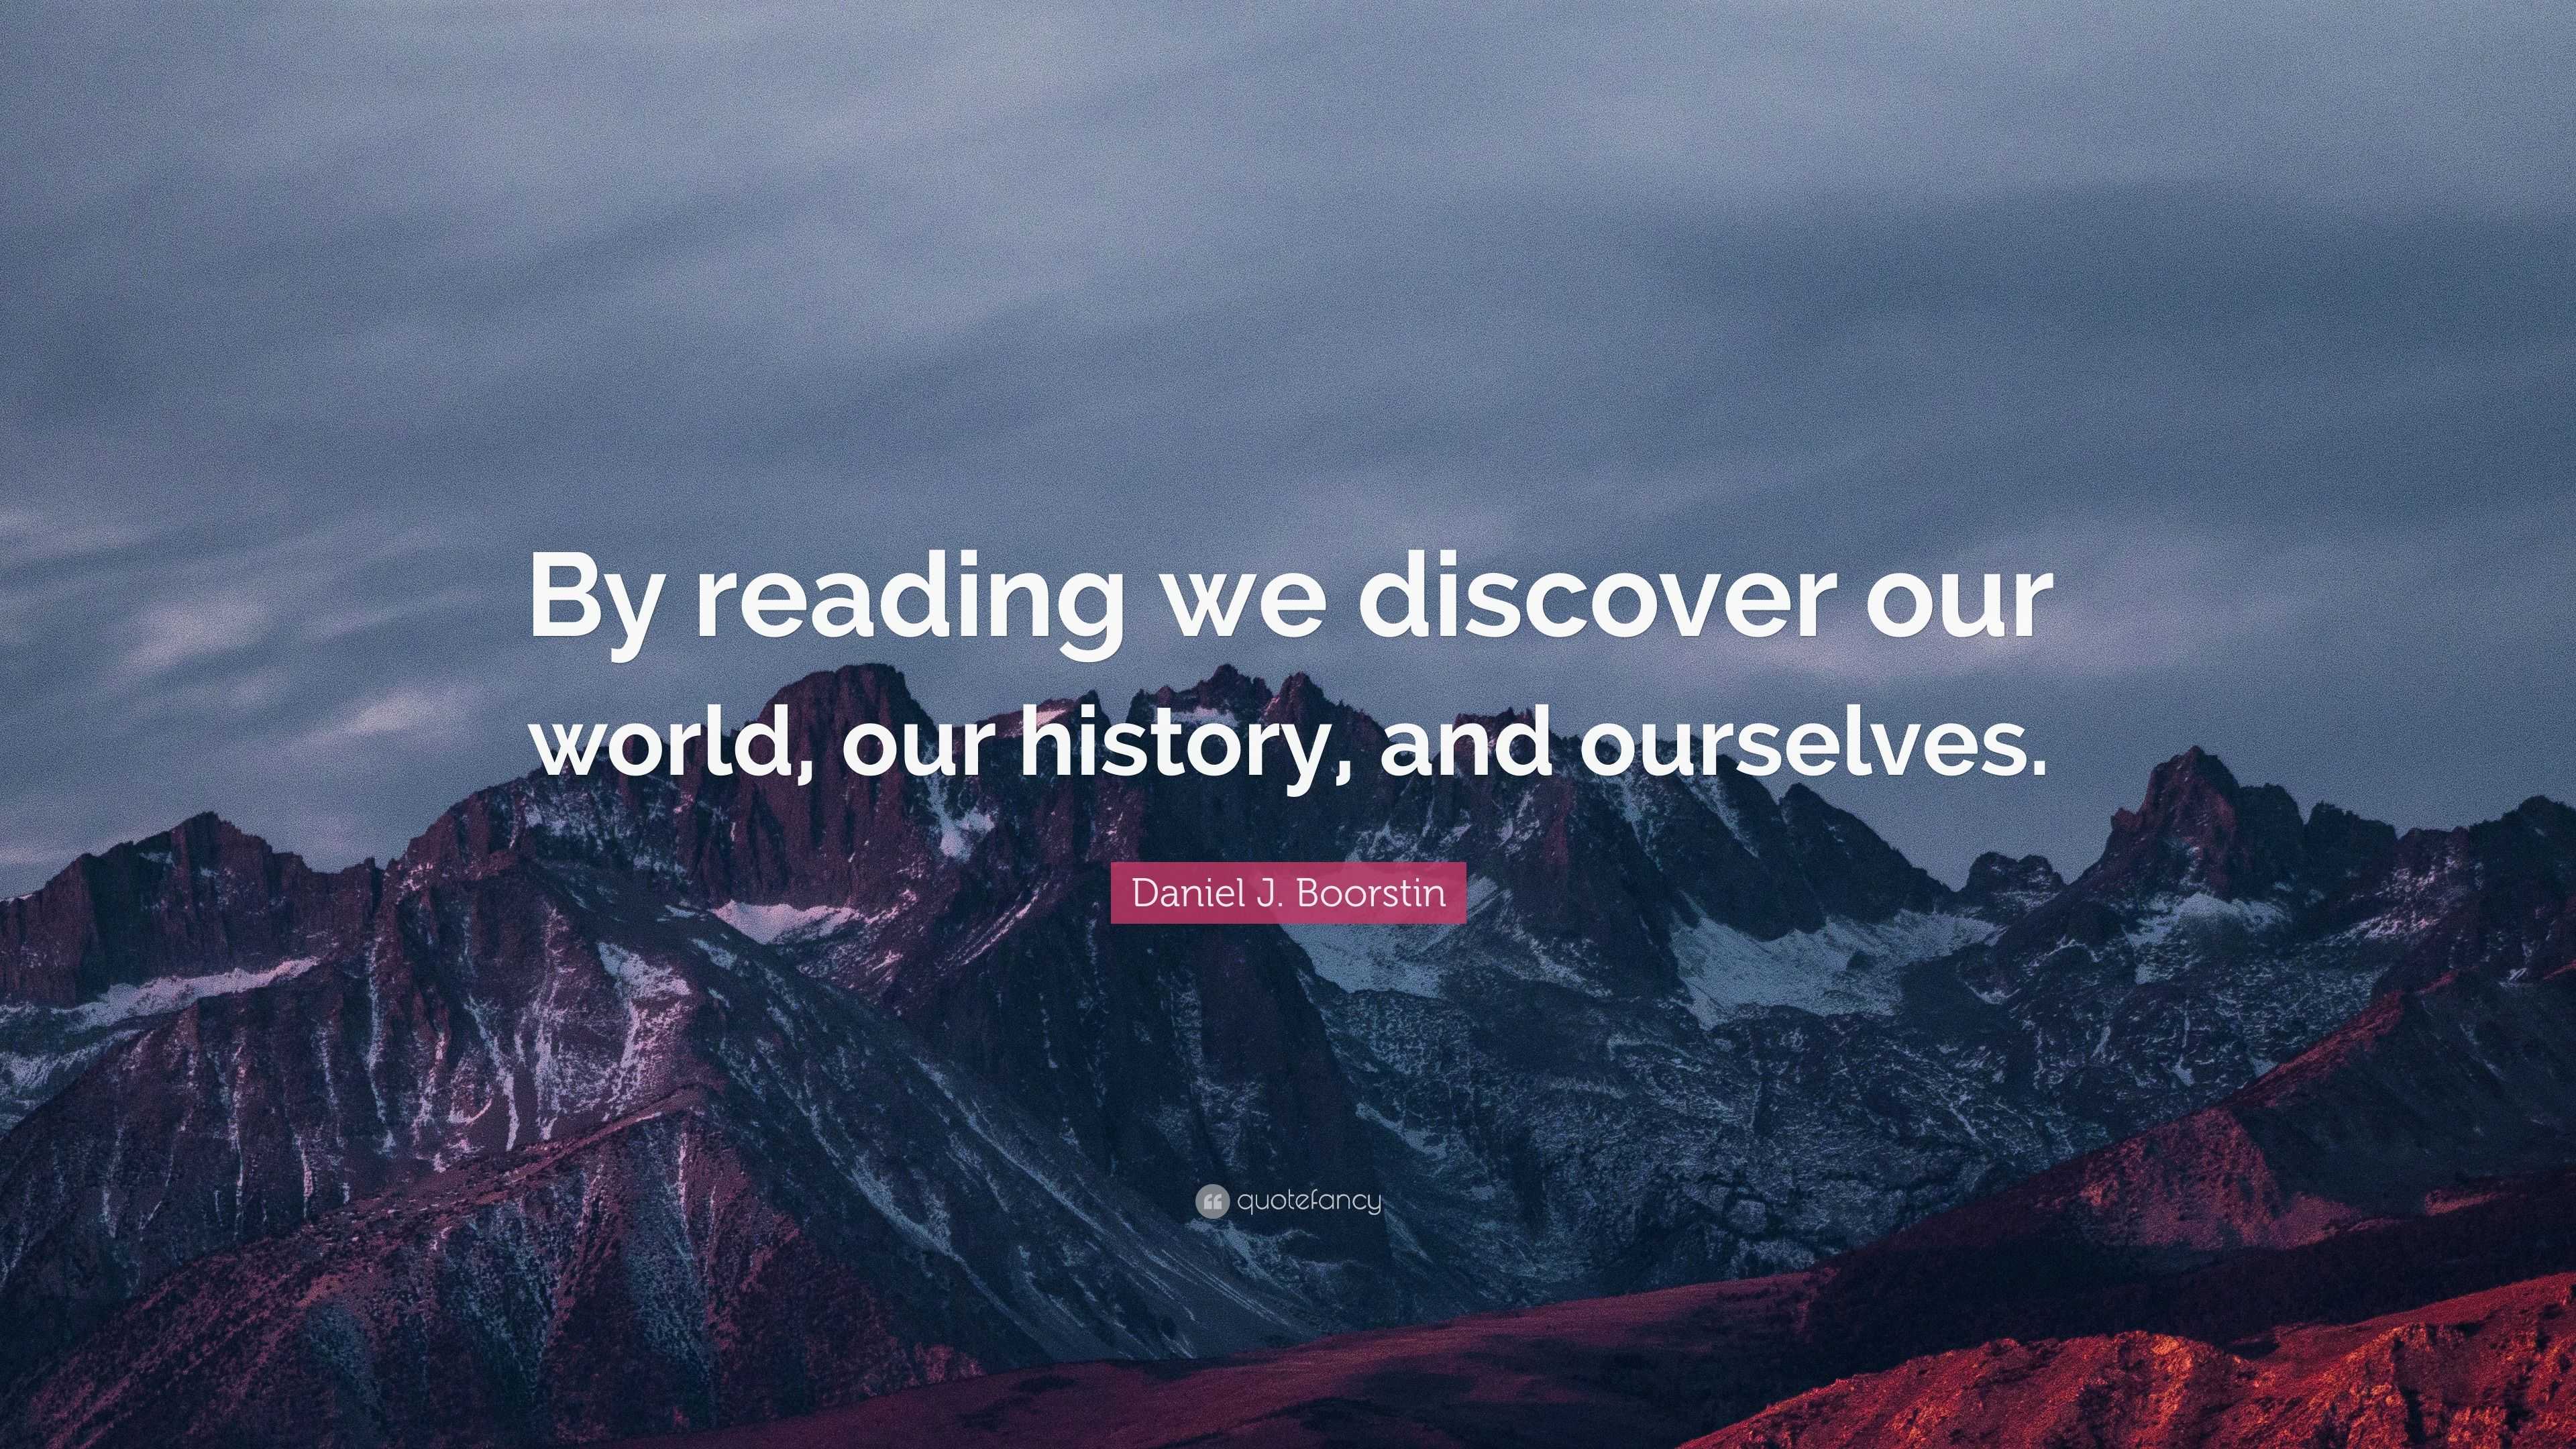 Daniel J. Boorstin Quote: “By reading we discover our world, our